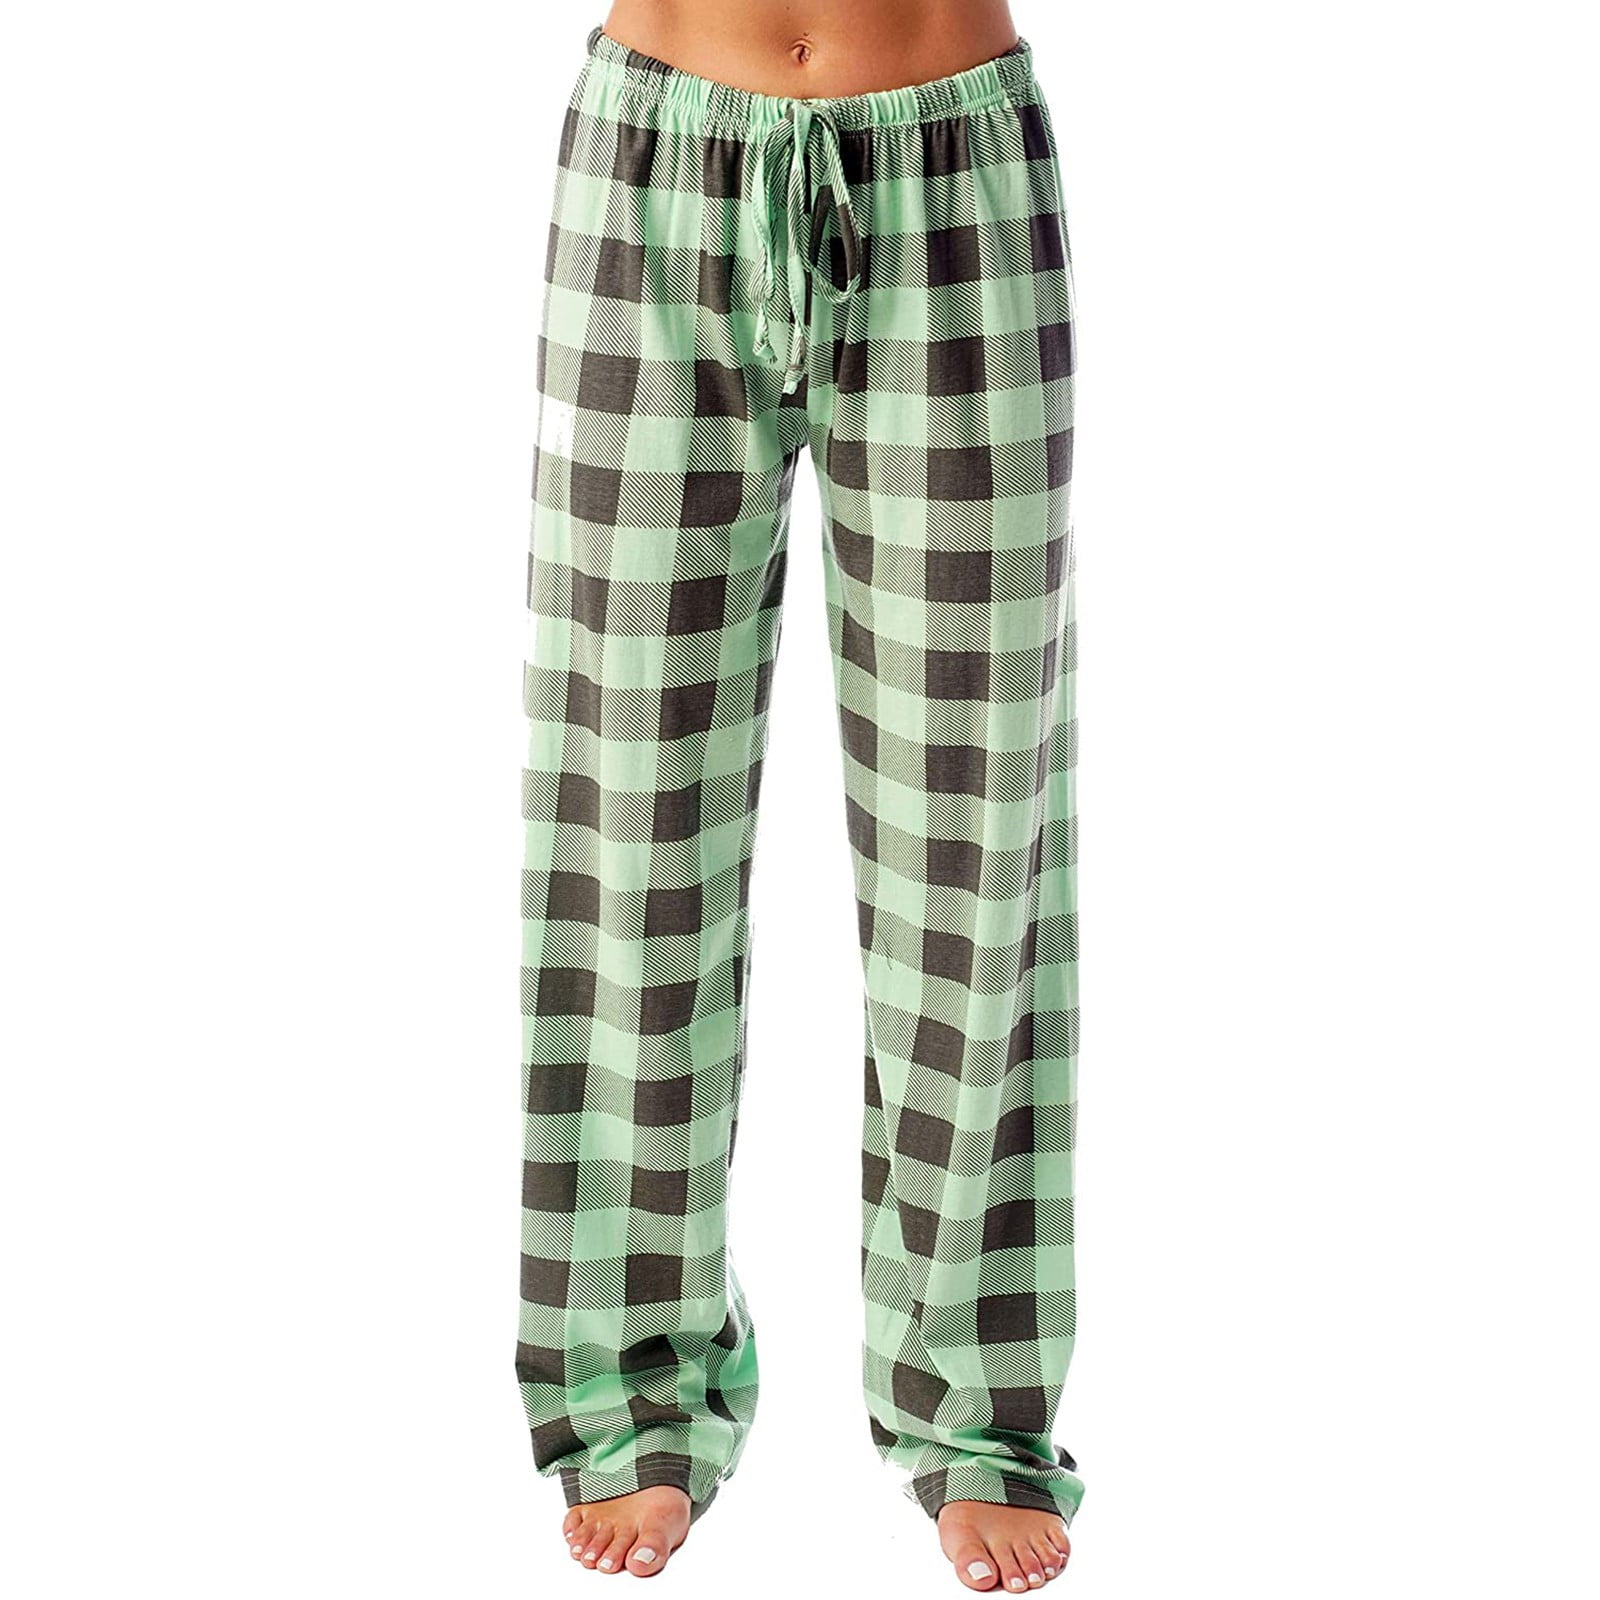 Ladies Pink Flannel Pants - NYSTF